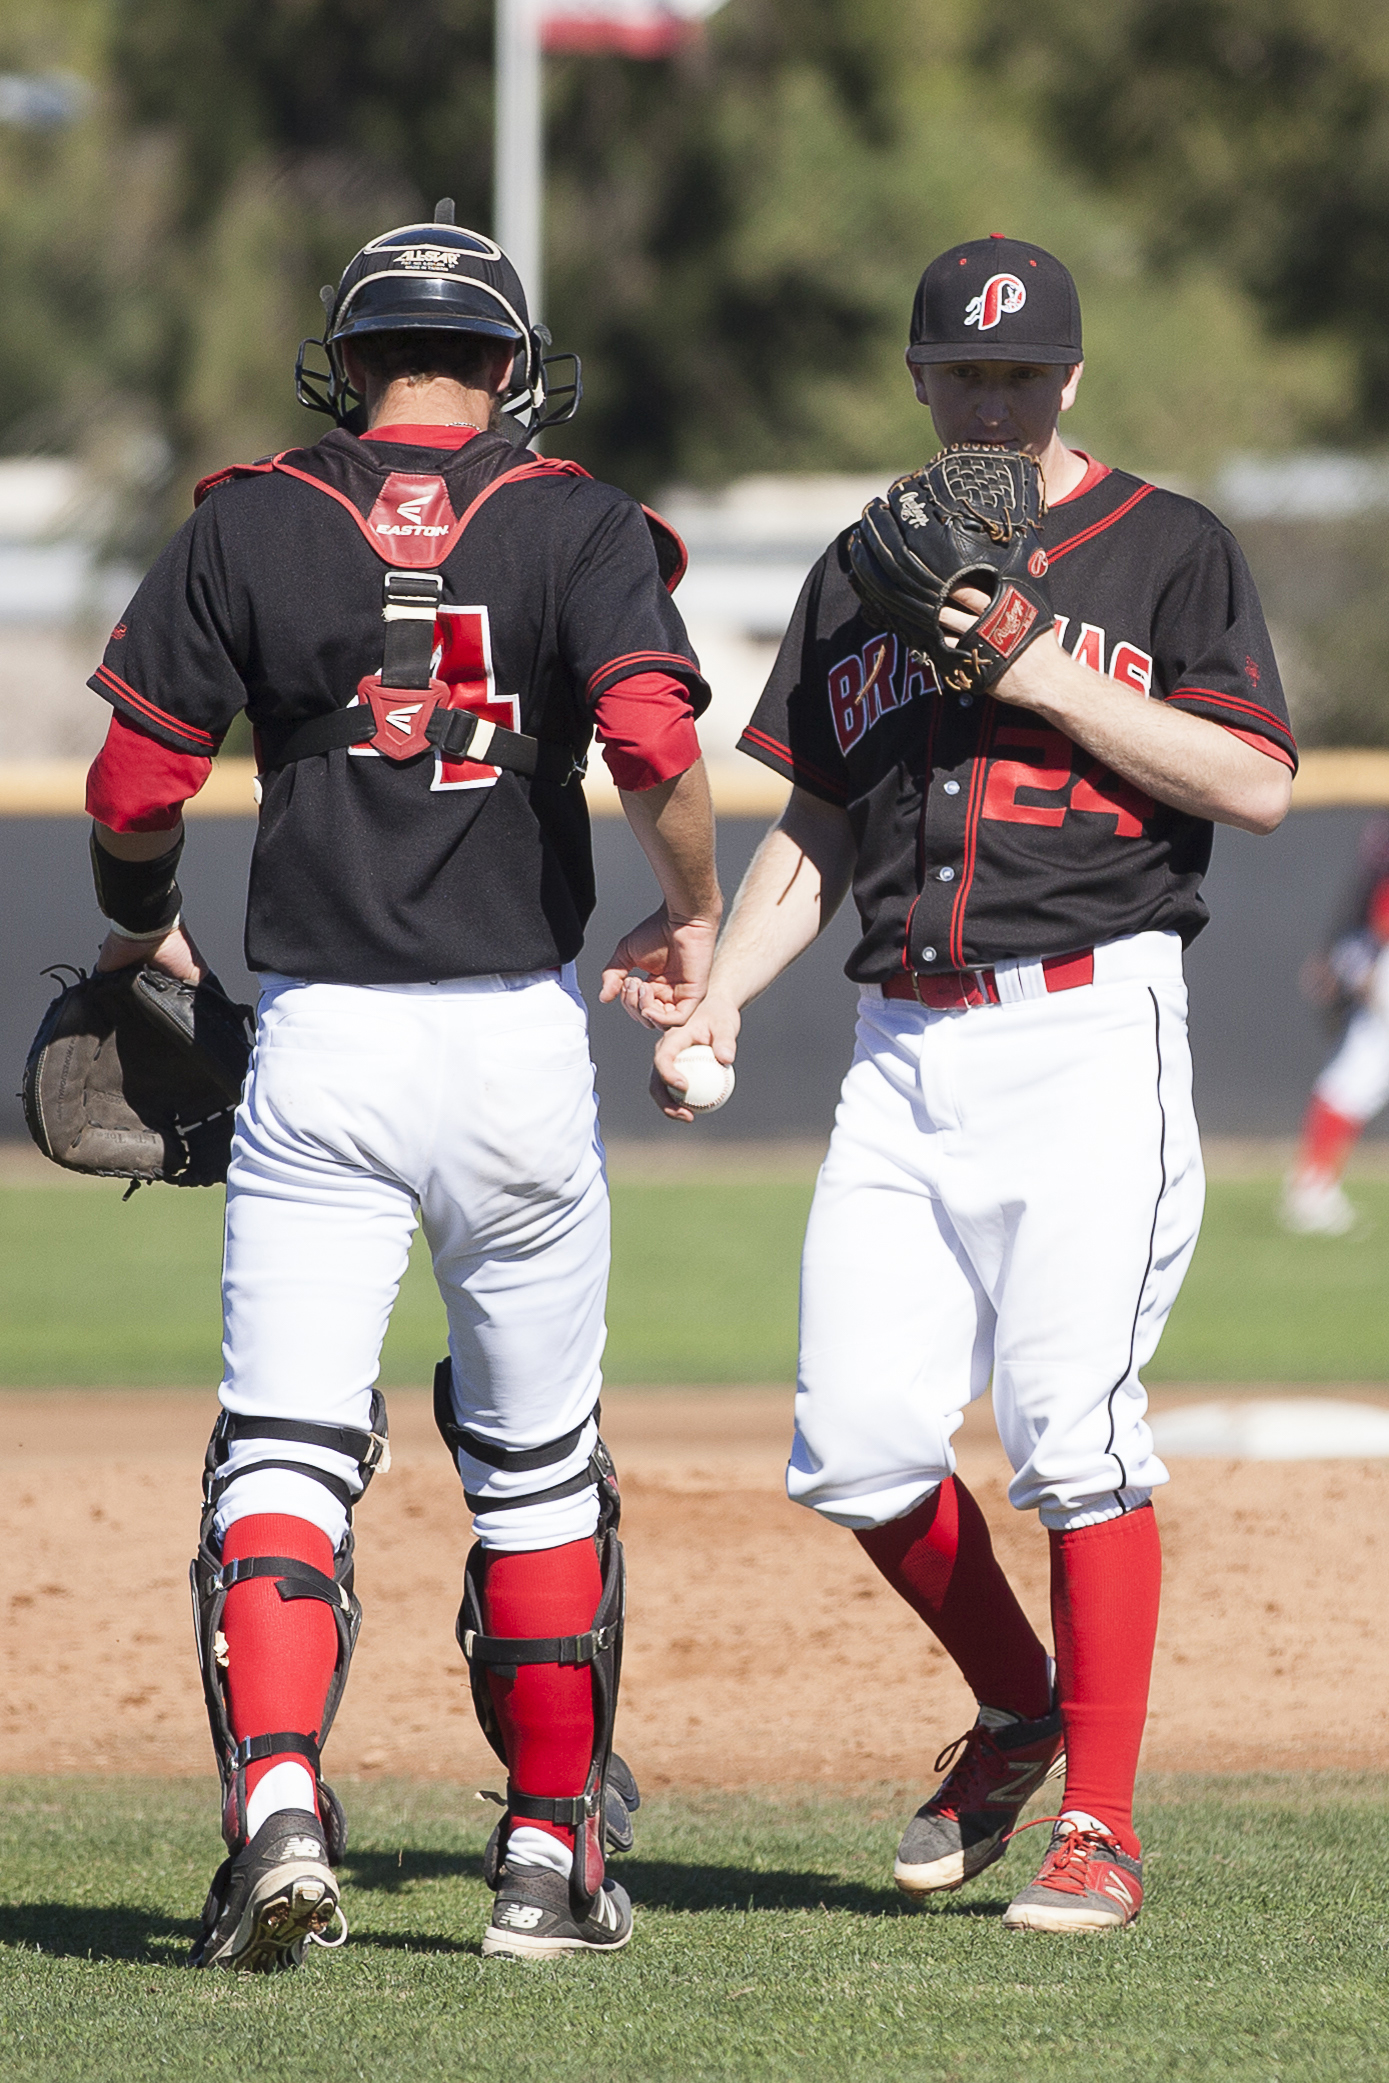  Evan Yeager, left, has a brief meeting with Brett Weisberg on the mound before facing the next Glendale batter during a home game in Woodland Hills, Calif., against Glendale College on Saturday, Feb. 13, 2016. 